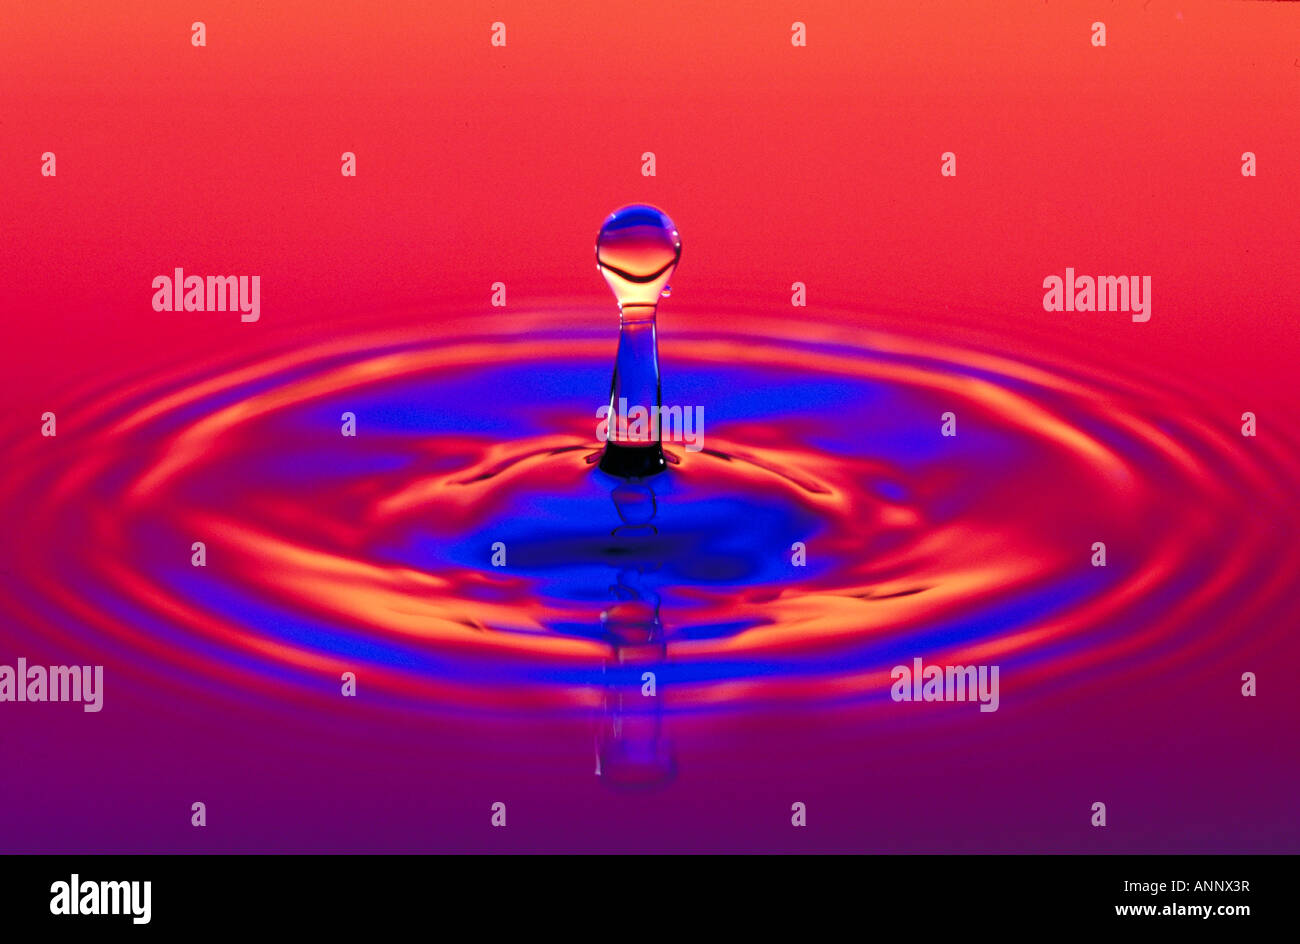 Pillar result of recoil from impact of water droplet Water frozen by strobe light. Stock Photo